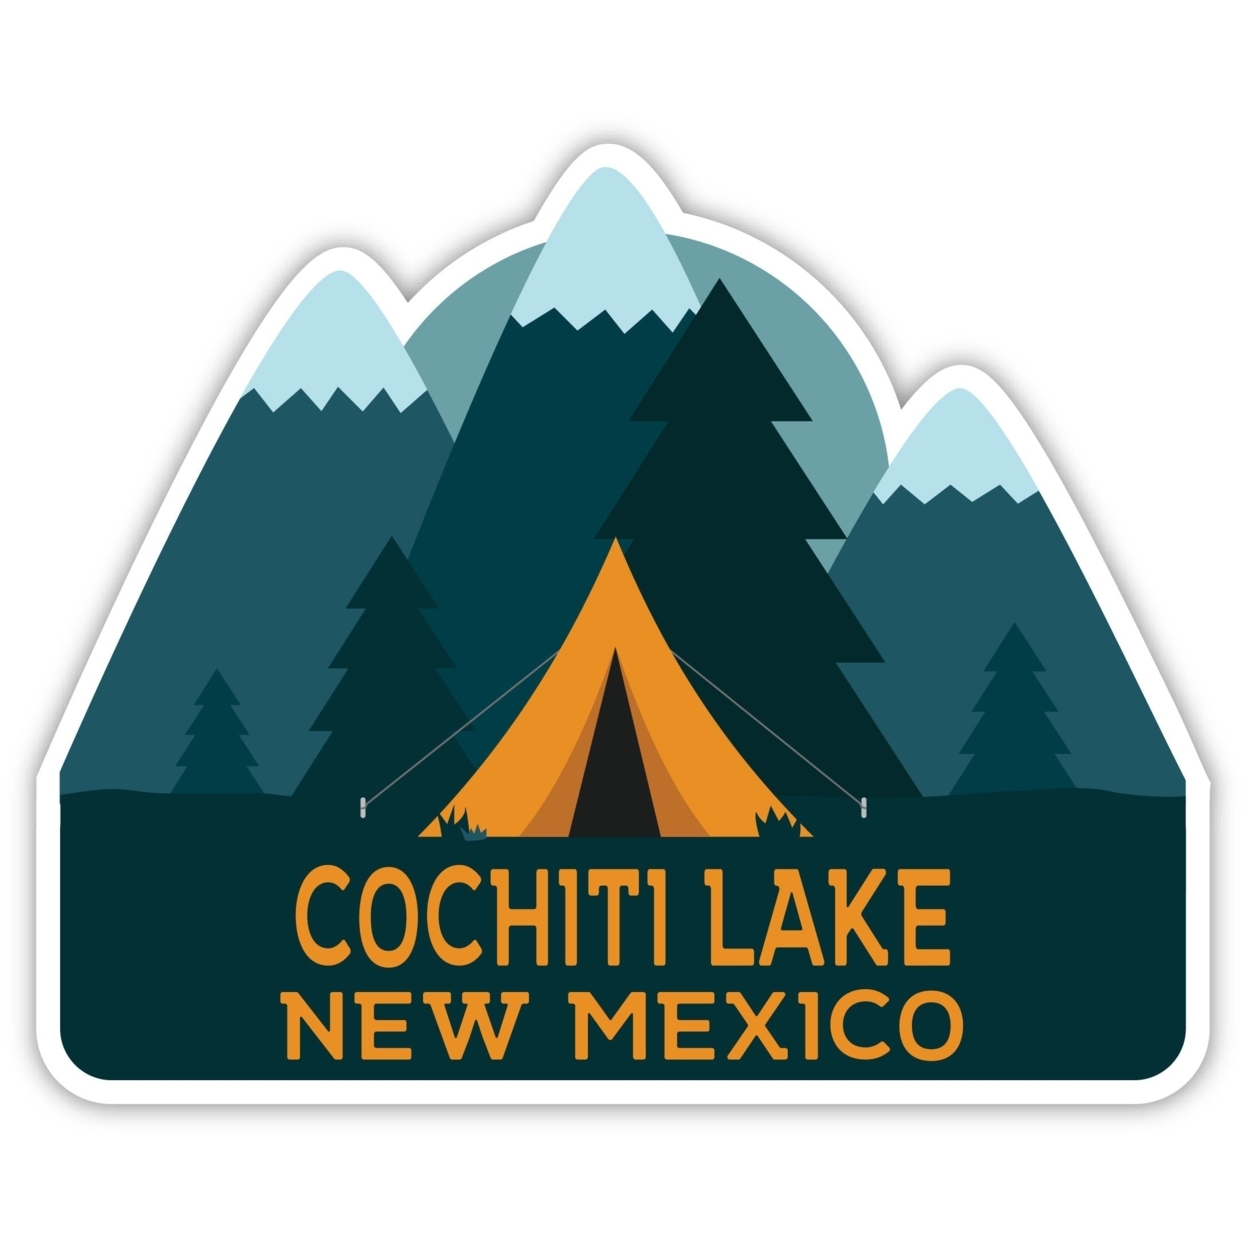 Cochiti Lake New Mexico Souvenir Decorative Stickers (Choose Theme And Size) - 4-Pack, 4-Inch, Tent